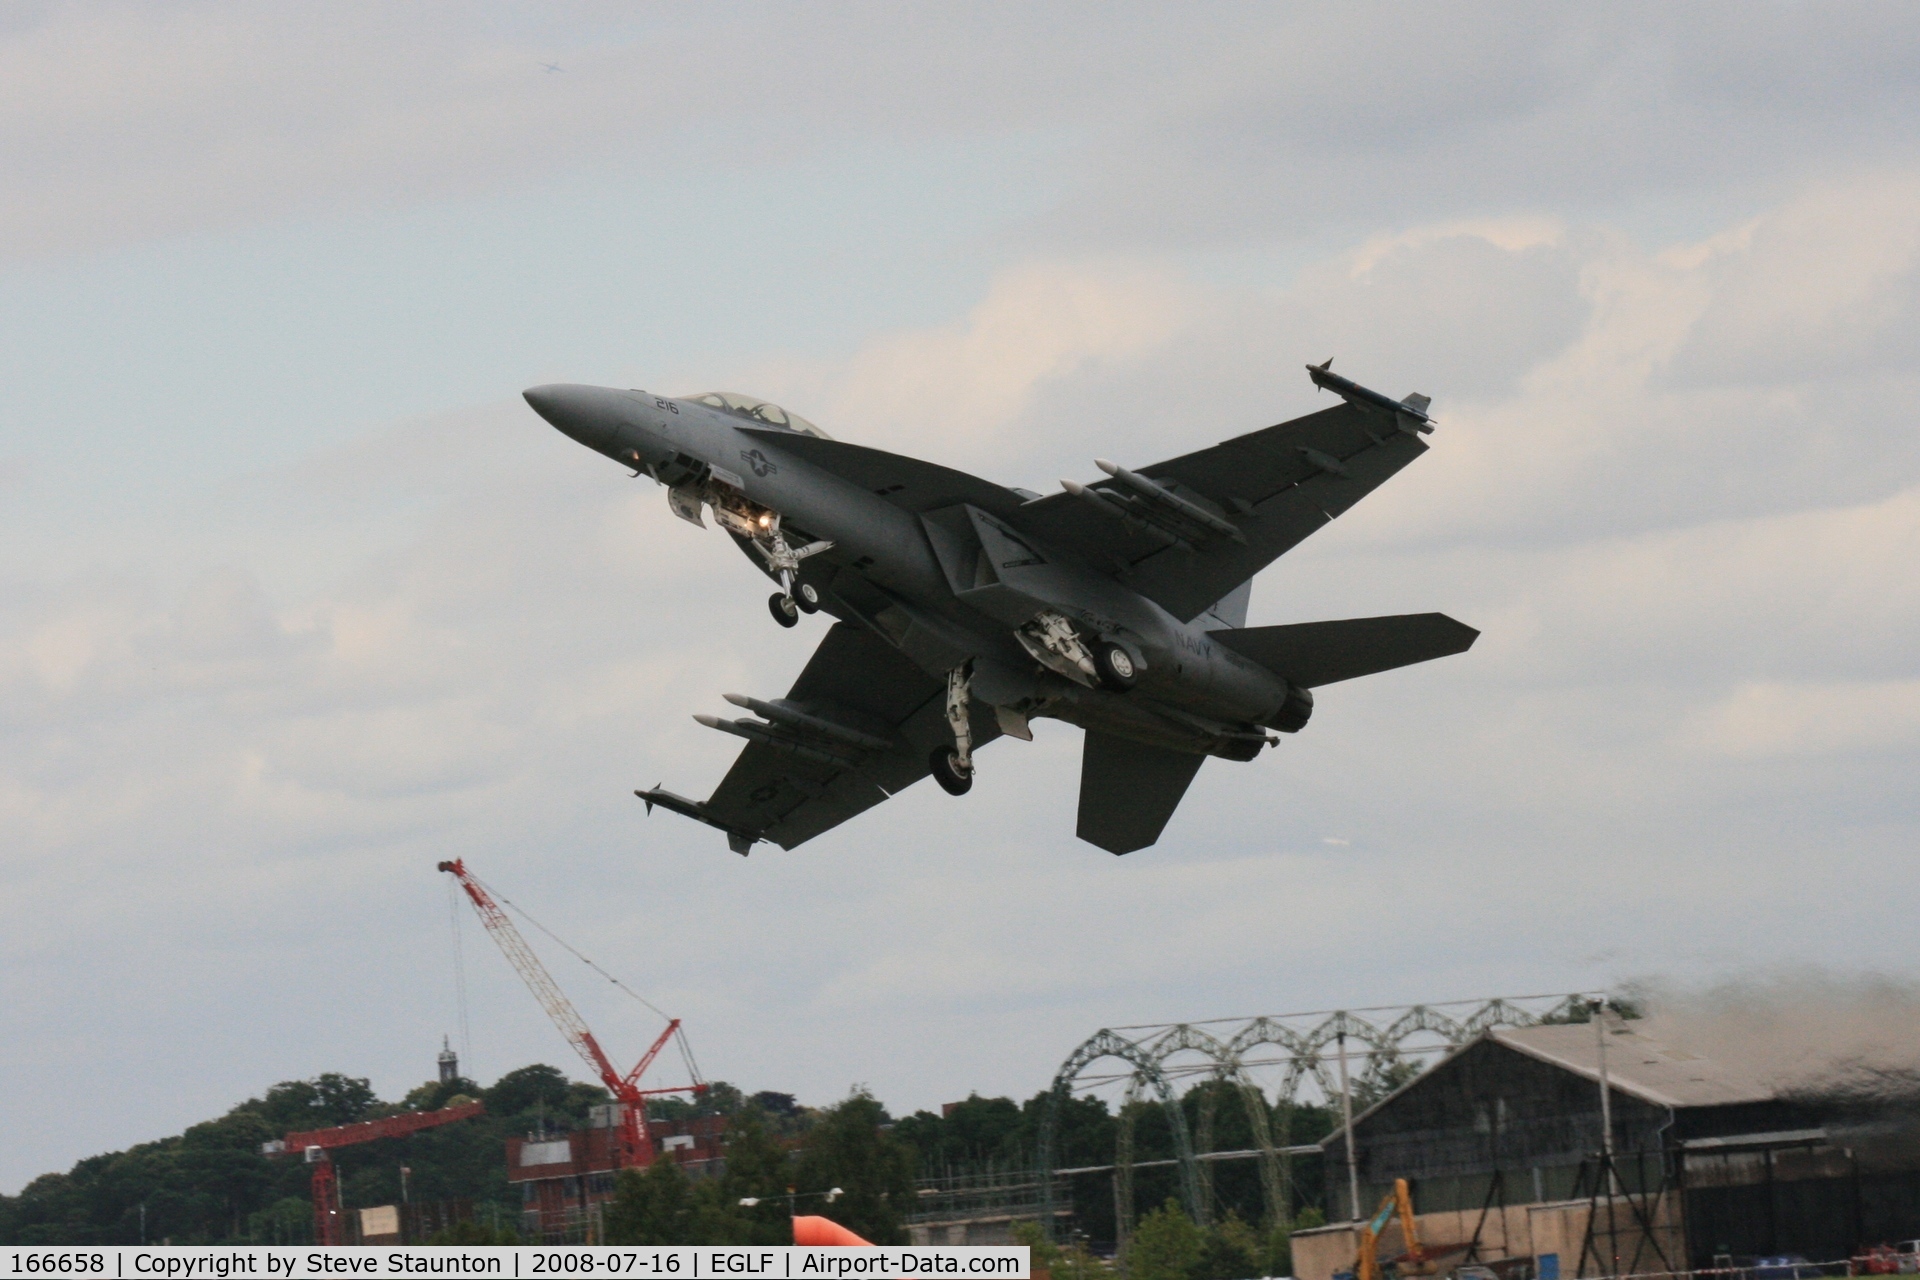 166658, Boeing F/A-18F Super Hornet C/N F136, Taken at Farnborough Airshow on the Wednesday trade day, 16th July 2009